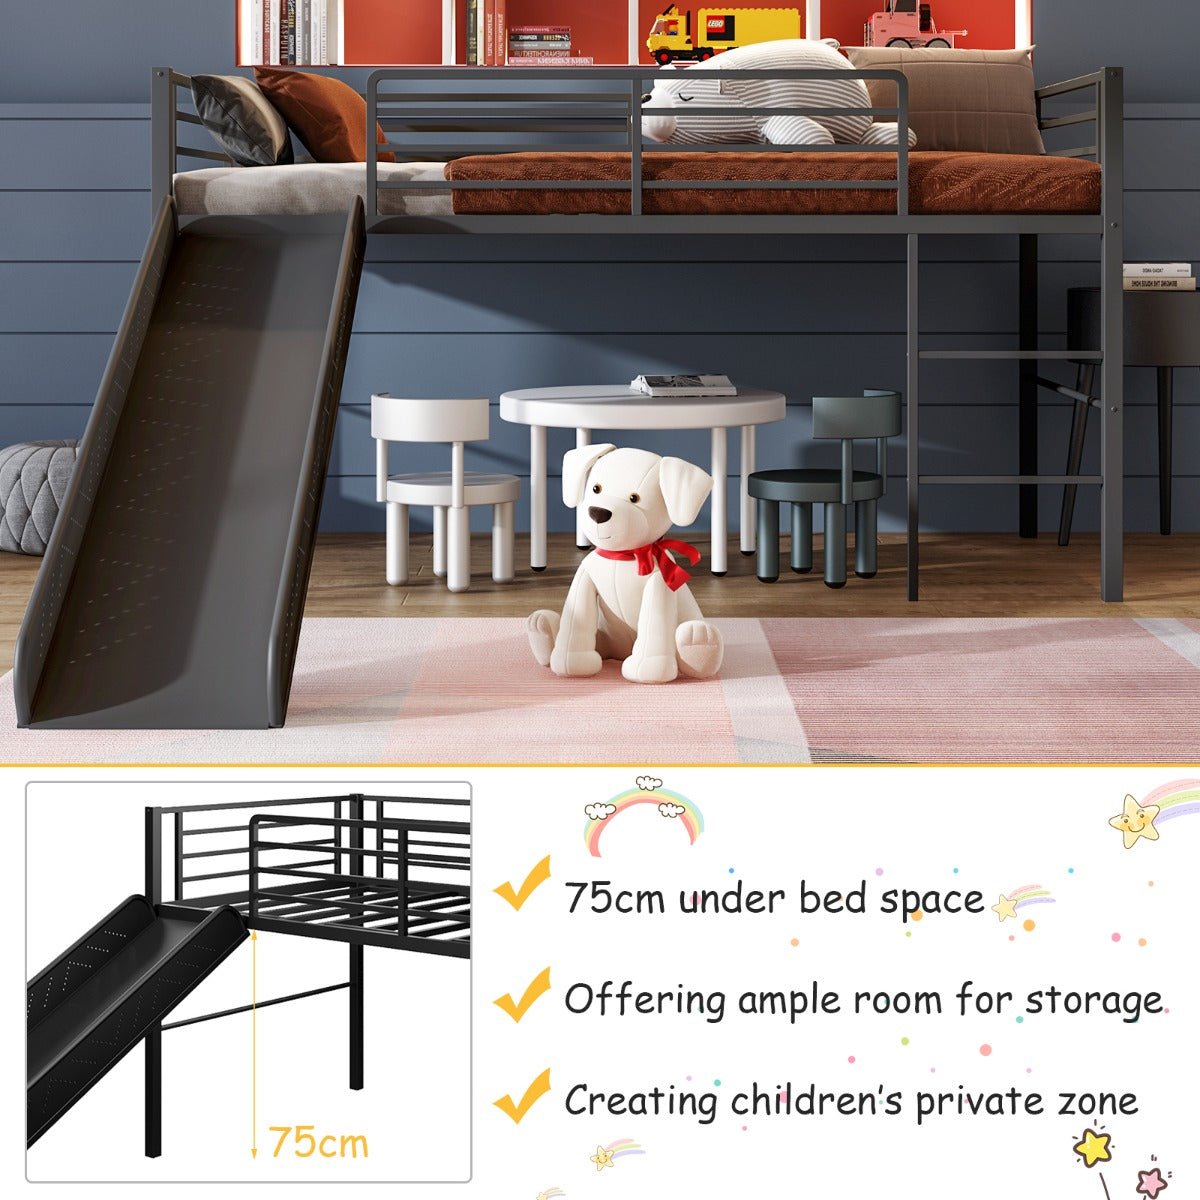 Quality Bedtime Fun with Our Loft Bed